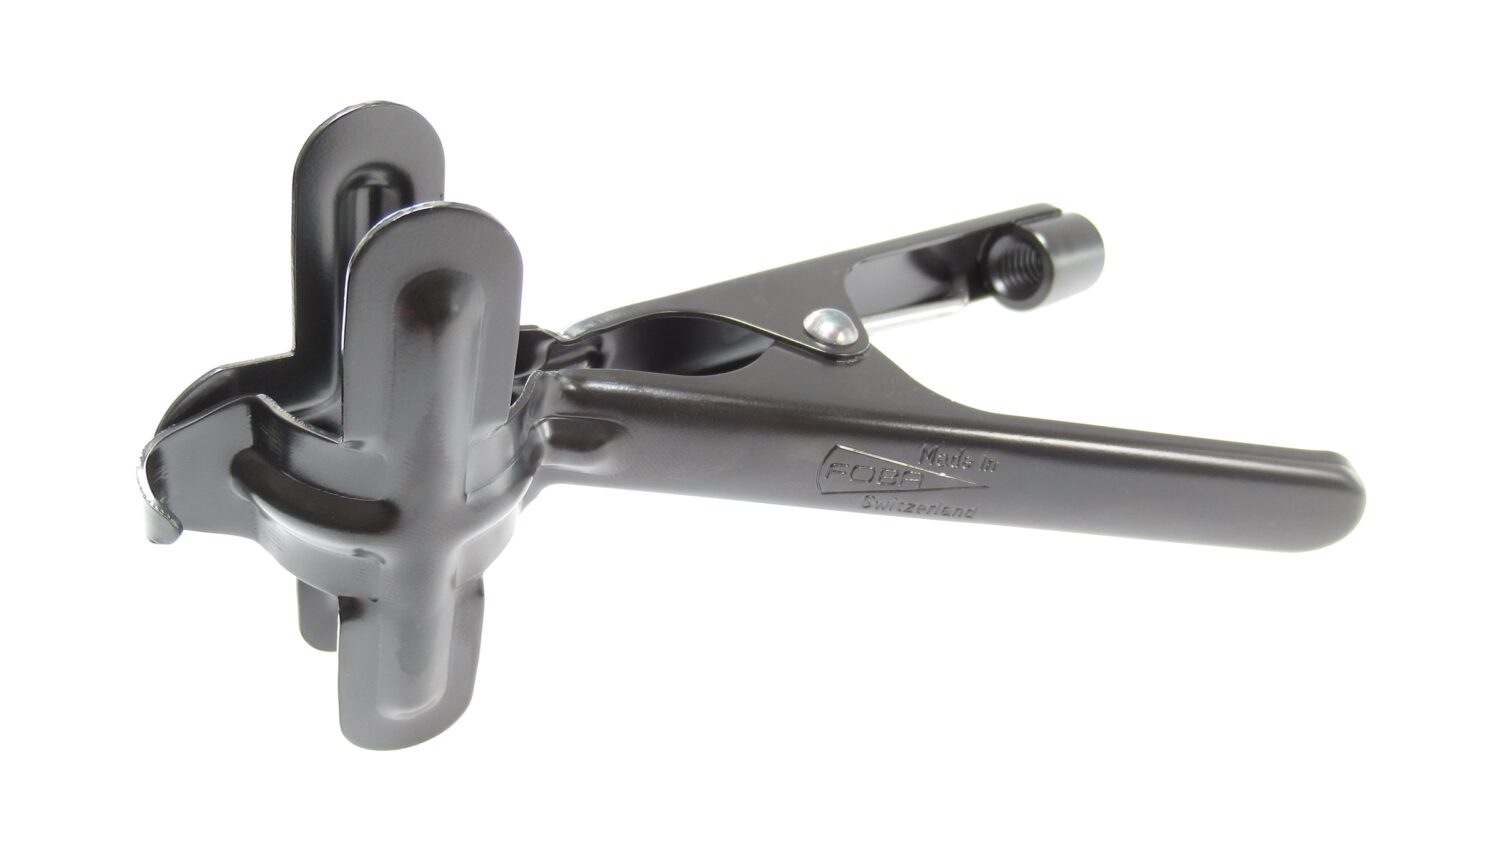 FOBA strong clamp with a tapped hole